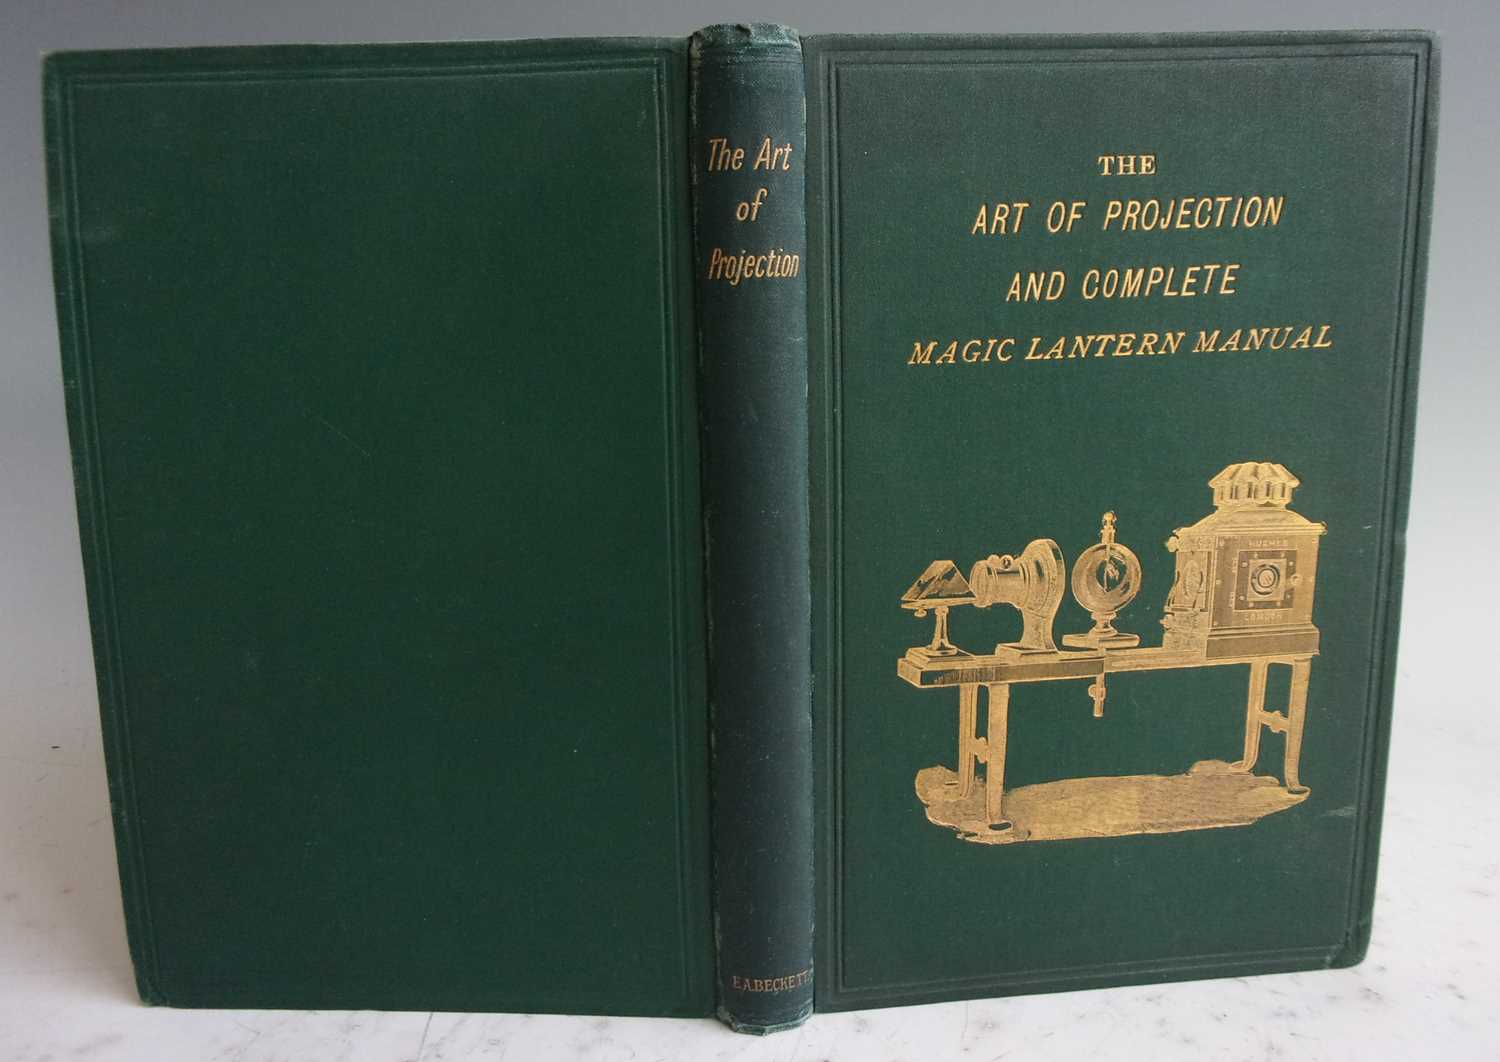 THE ART OF PROJECTION AND COMPLETE MAGIC LANTERN MANUAL, By an Expert. E.A. Beckett, London 1893.